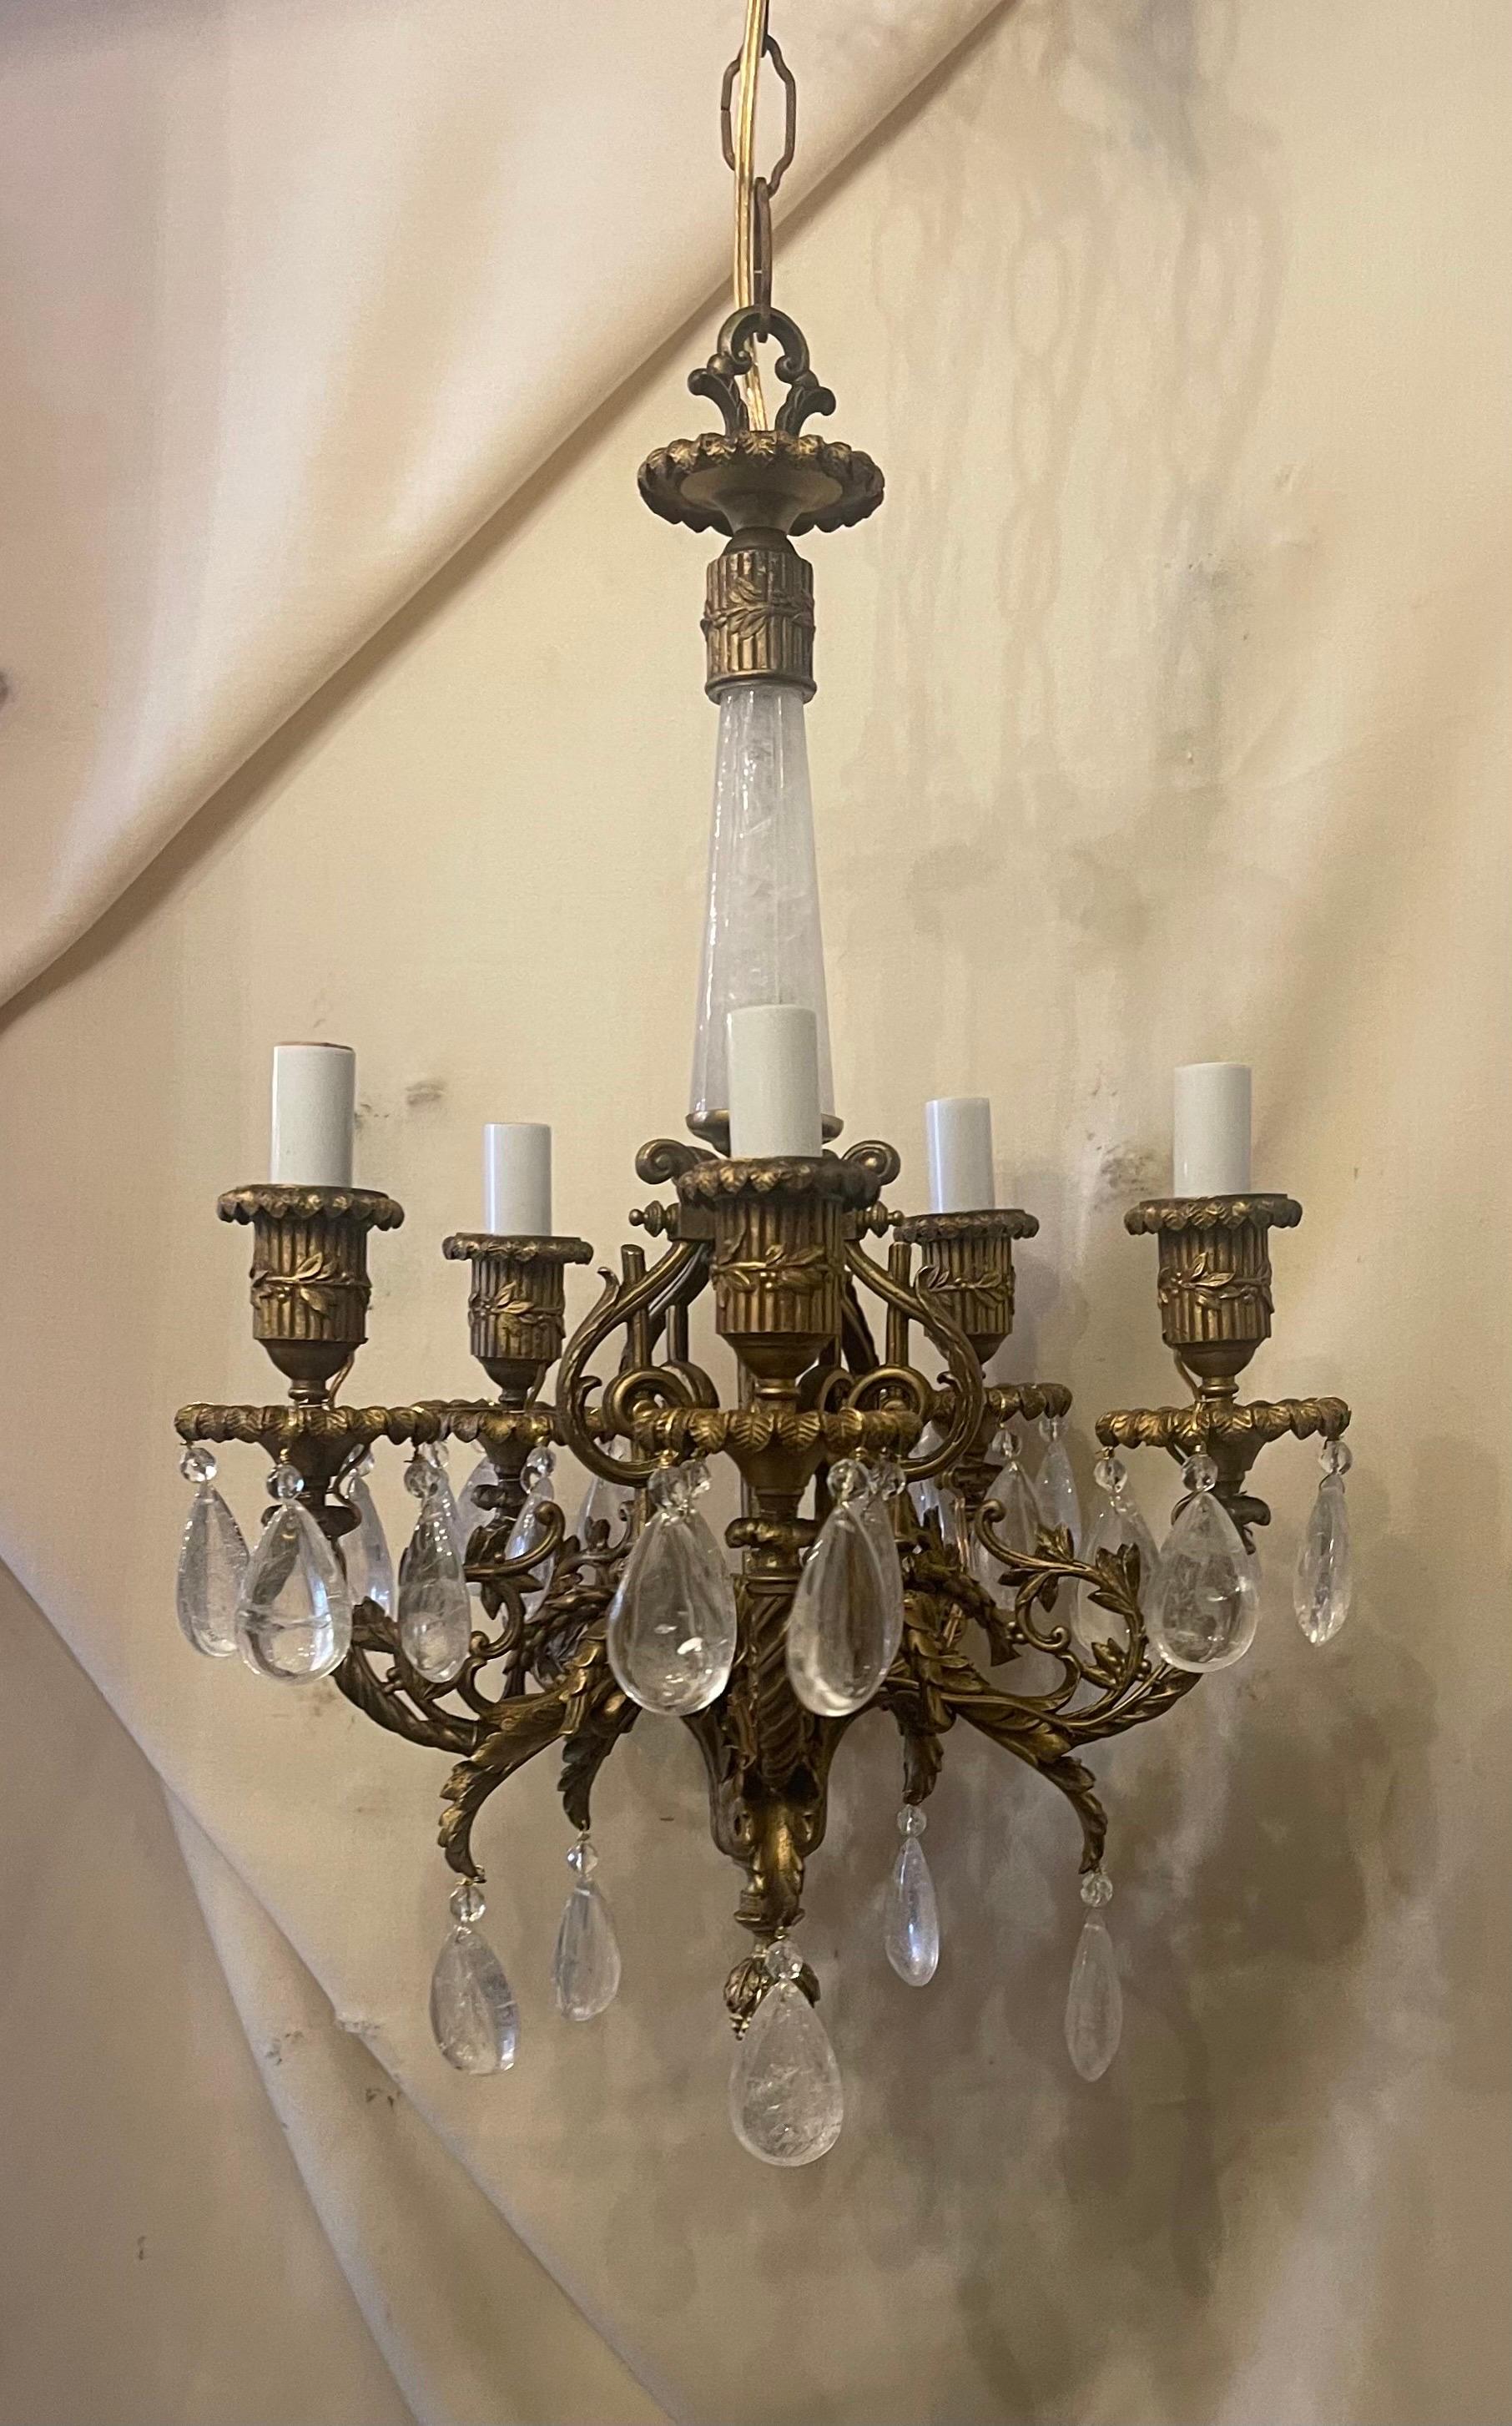 A Wonderful Pair Of French Louis XVI Style Bronze & Rock Crystal Petite Five-Arm Chandeliers Completely Rewired With New Sockets And Accompanied By Chain And Canopy